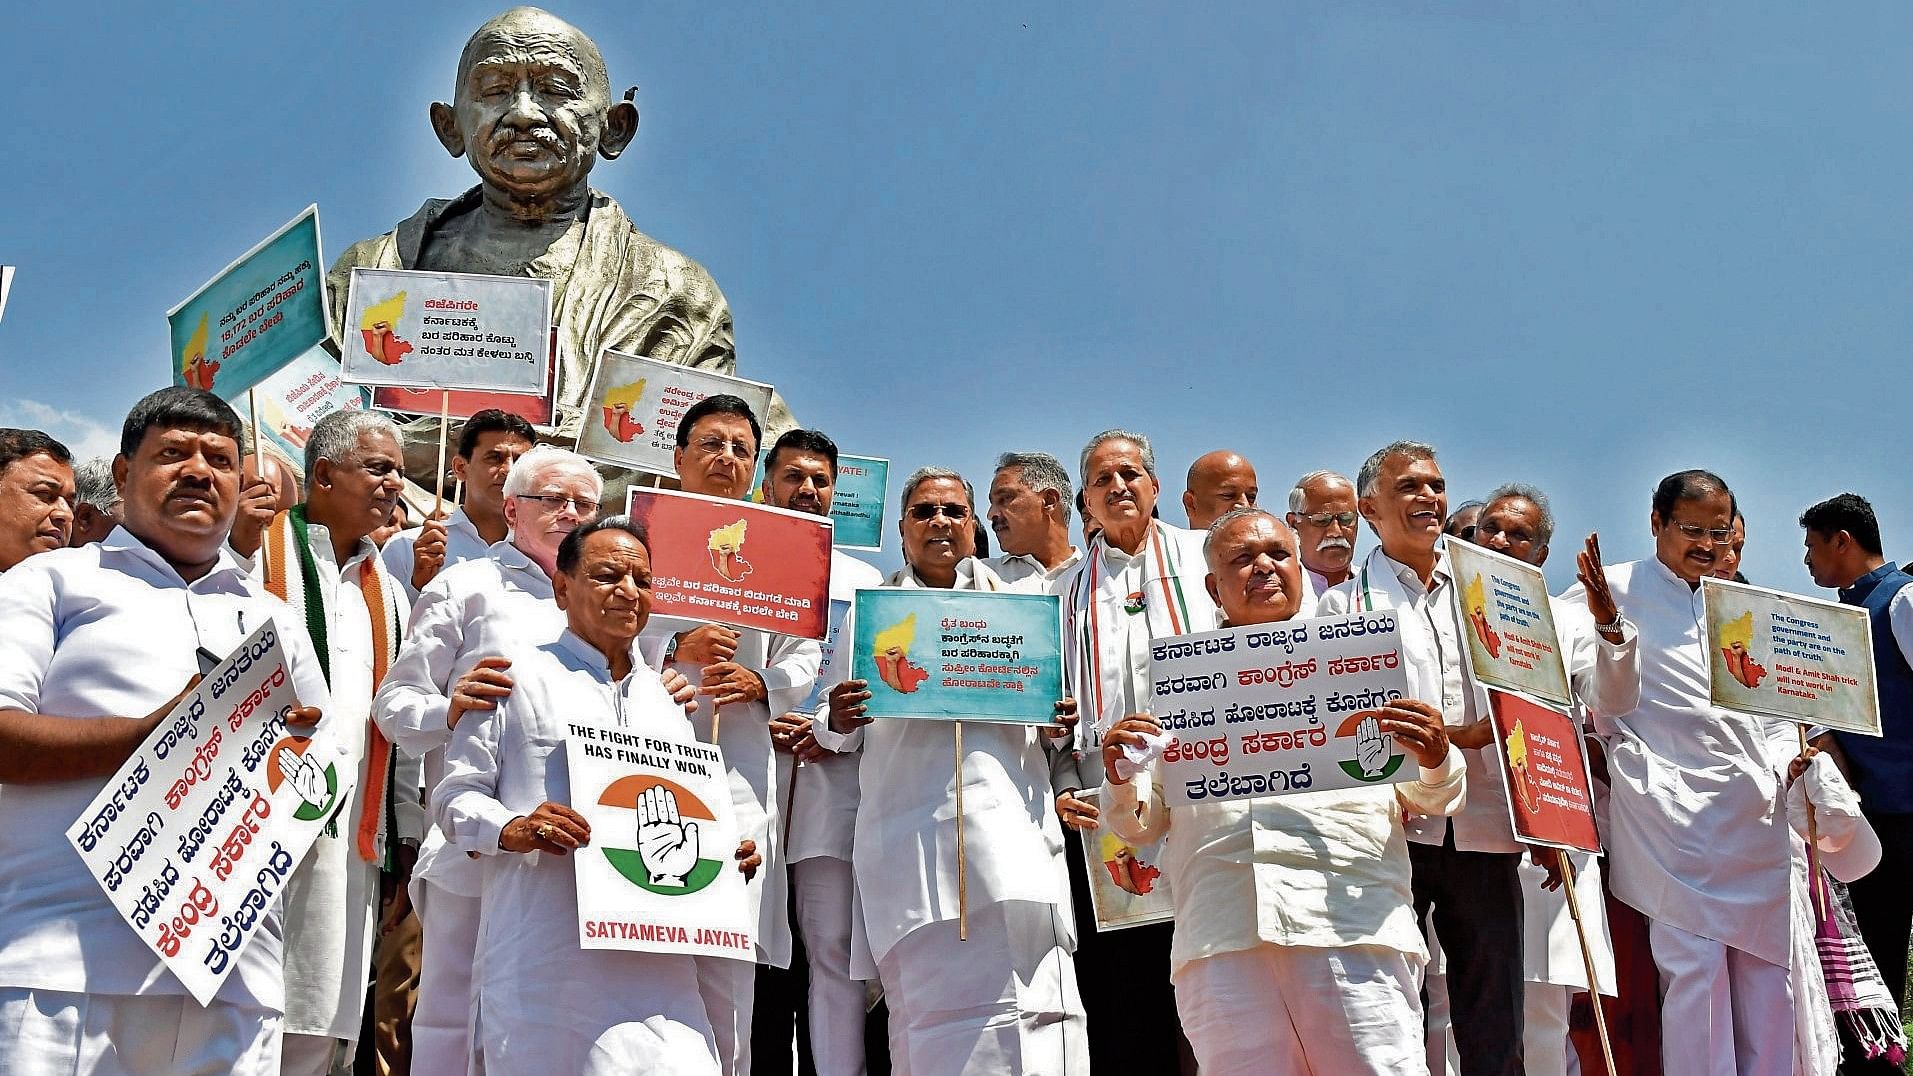 <div class="paragraphs"><p>In front of the Gandhi statue in front of Vidhana Soudha, the Congress party led by Chief Minister Siddaramaiah staged a protest against the central government against the discrimination in the drought relief that is supposed to come from the central government to the state government. AICC General Secretary Randeep Surjewala, Ministers KJ George, Ramalingareddy, Krishnabhair Gowda were present in the protest.</p></div>